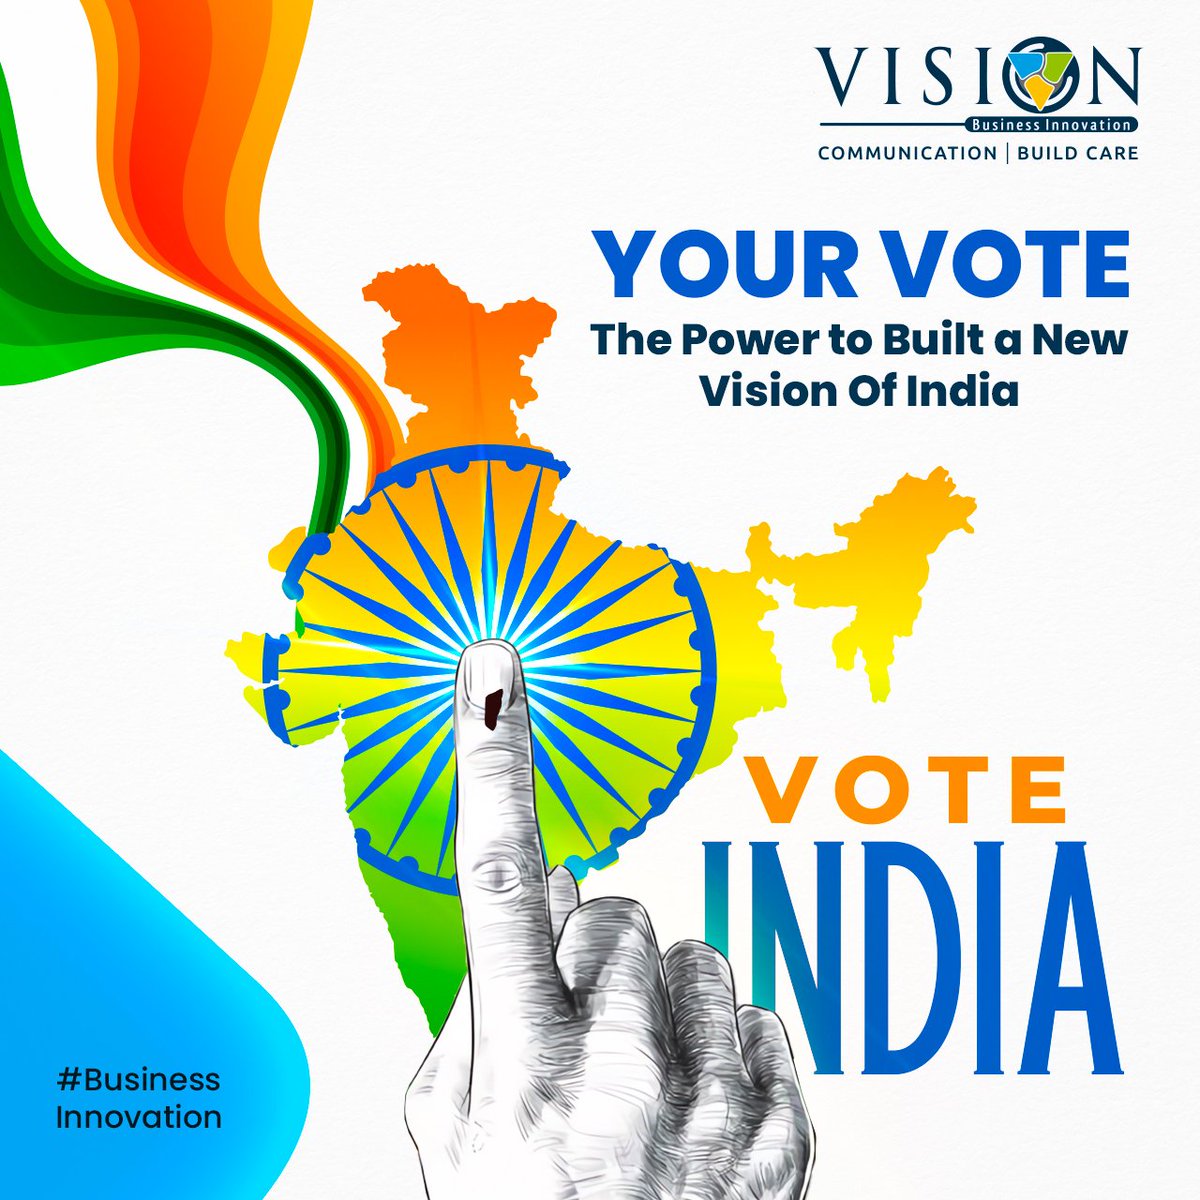 Your Vote the power to built a new vision of India.
#VoteNow #votingrights #voting2024 #LokSabhaElection2024 #Vote2024 #VotingAwareness #YourVoteMatters #YourVoteYourVoice #EveryVoteMatters #votefornewindia🇮🇳 

#VisionCorp #VisionCommunication #VisionBuildCare #BusinessInnovation